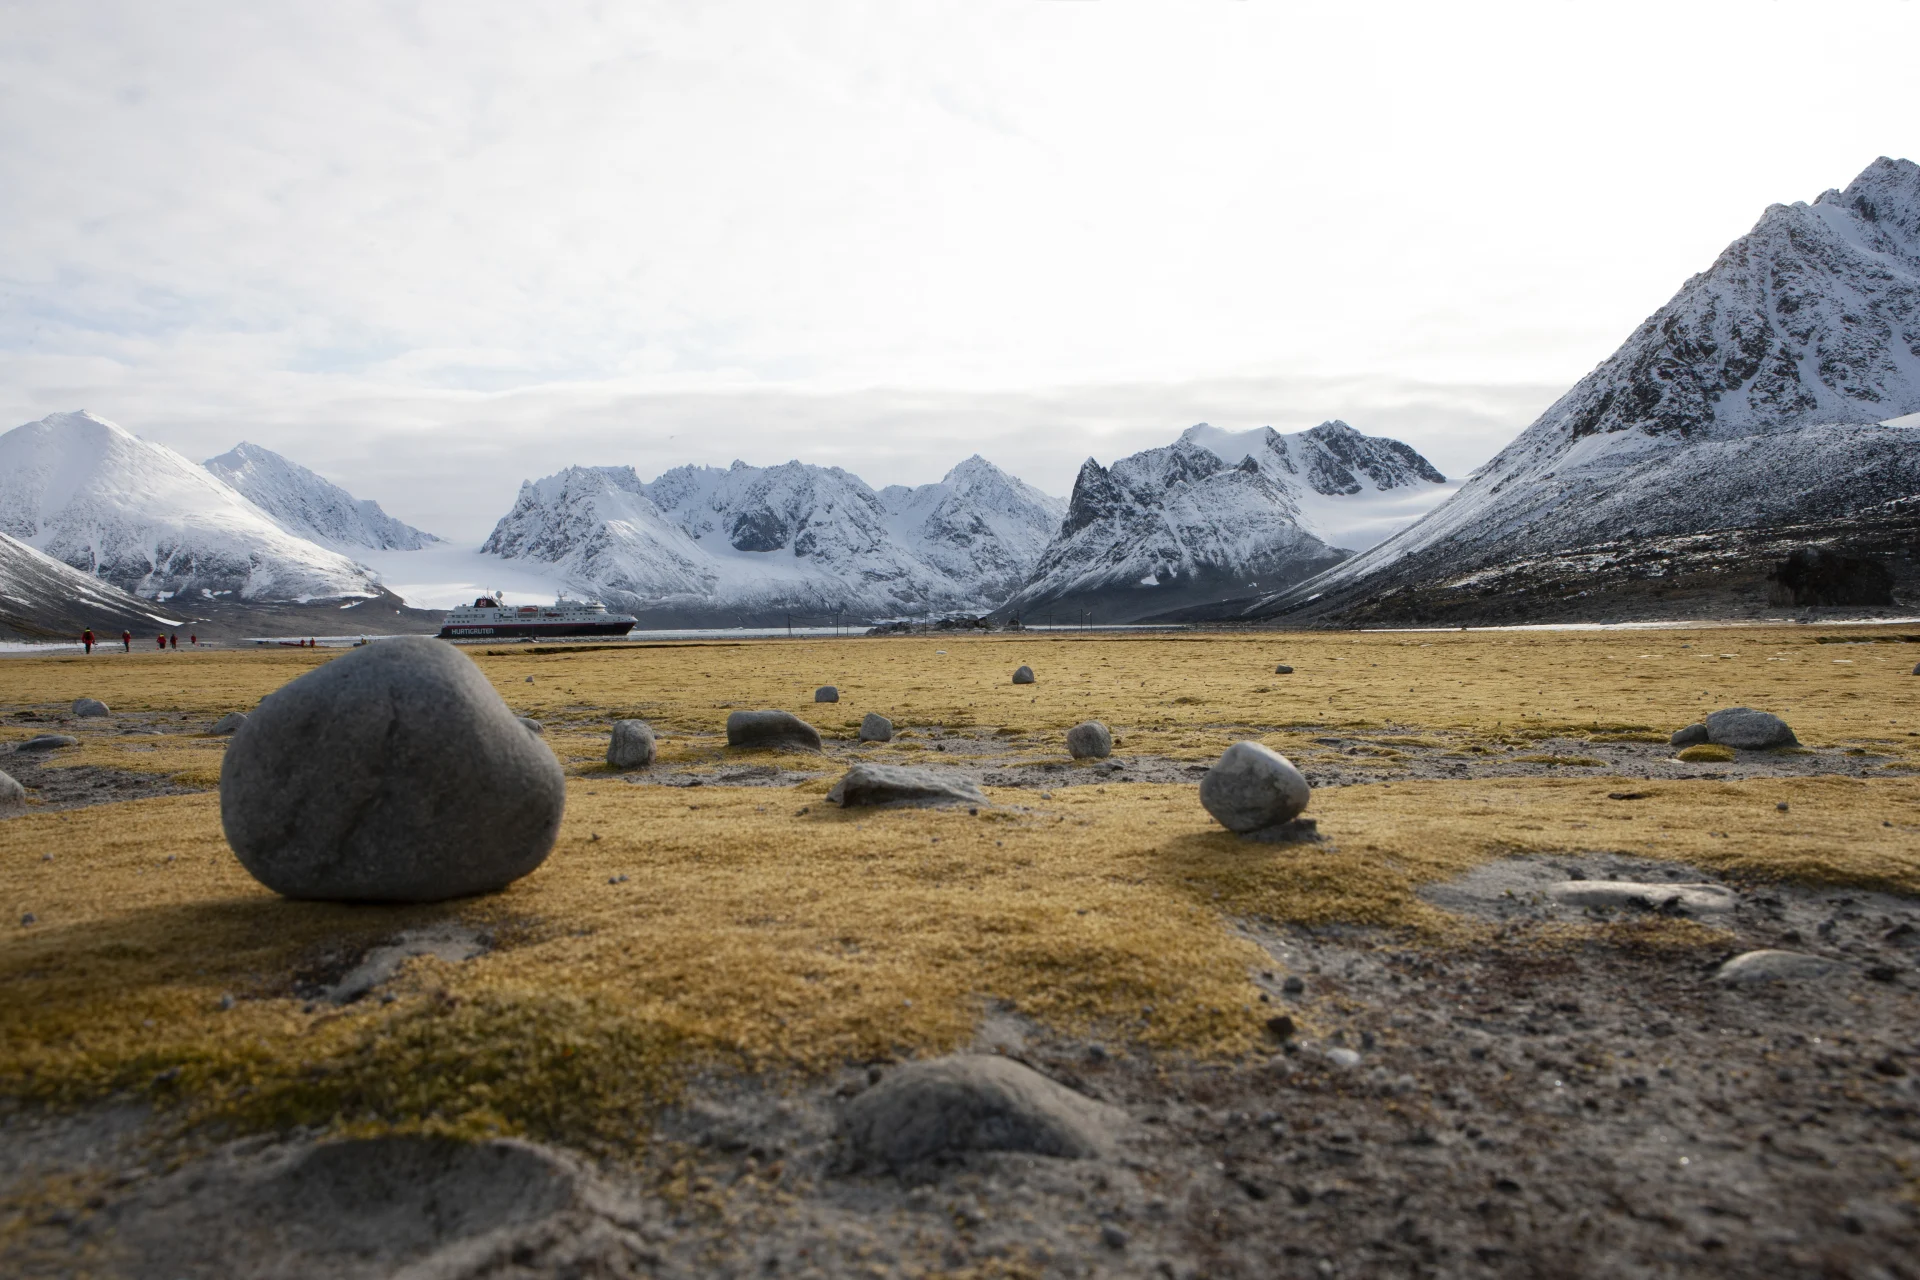 Circumnavigating Svalbard — The Ultimate Expedition   